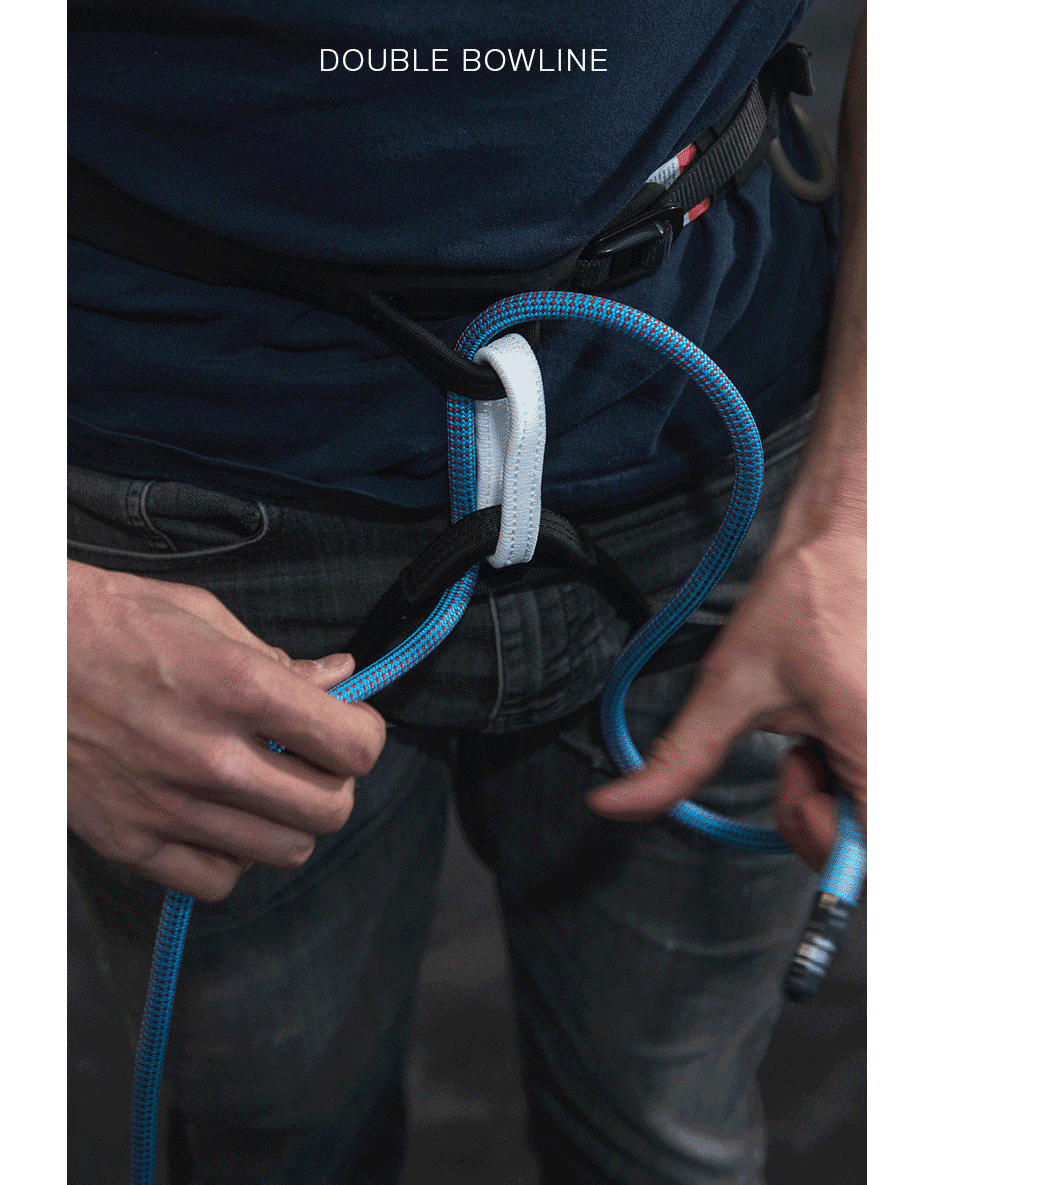 A climber ties in with a double bowline knot.